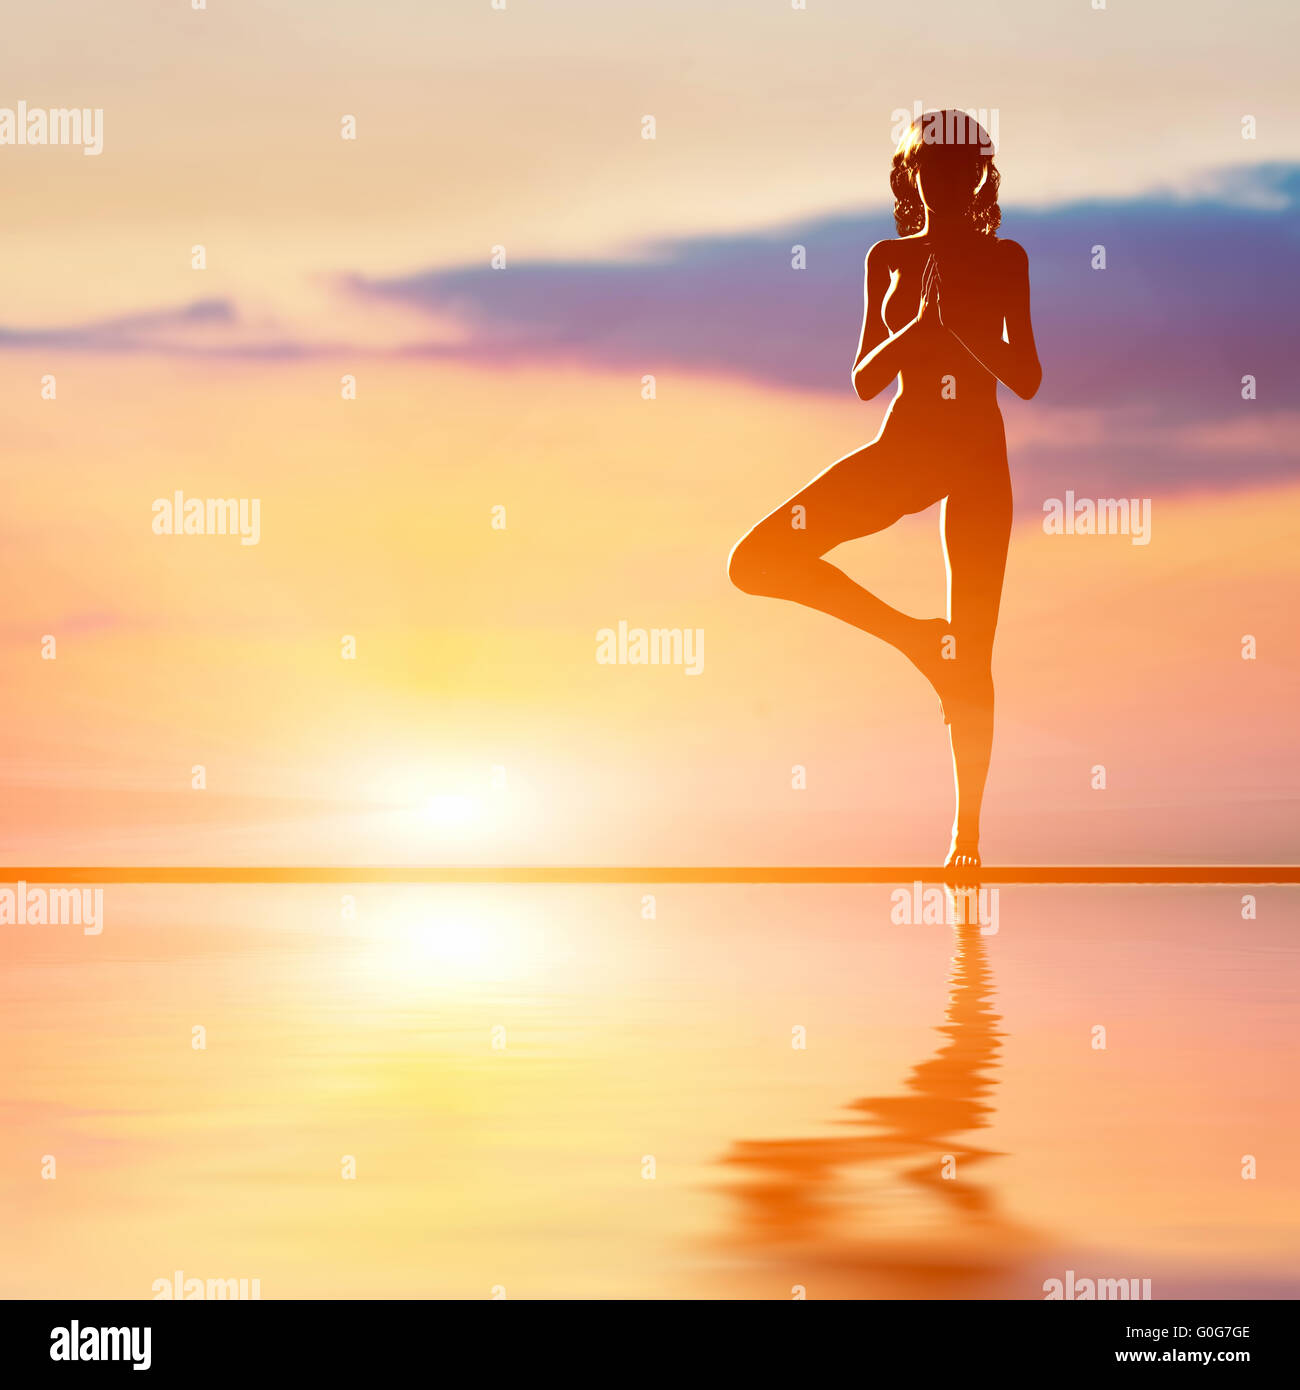 A silhouette of a woman standing in tree yoga position Stock Photo